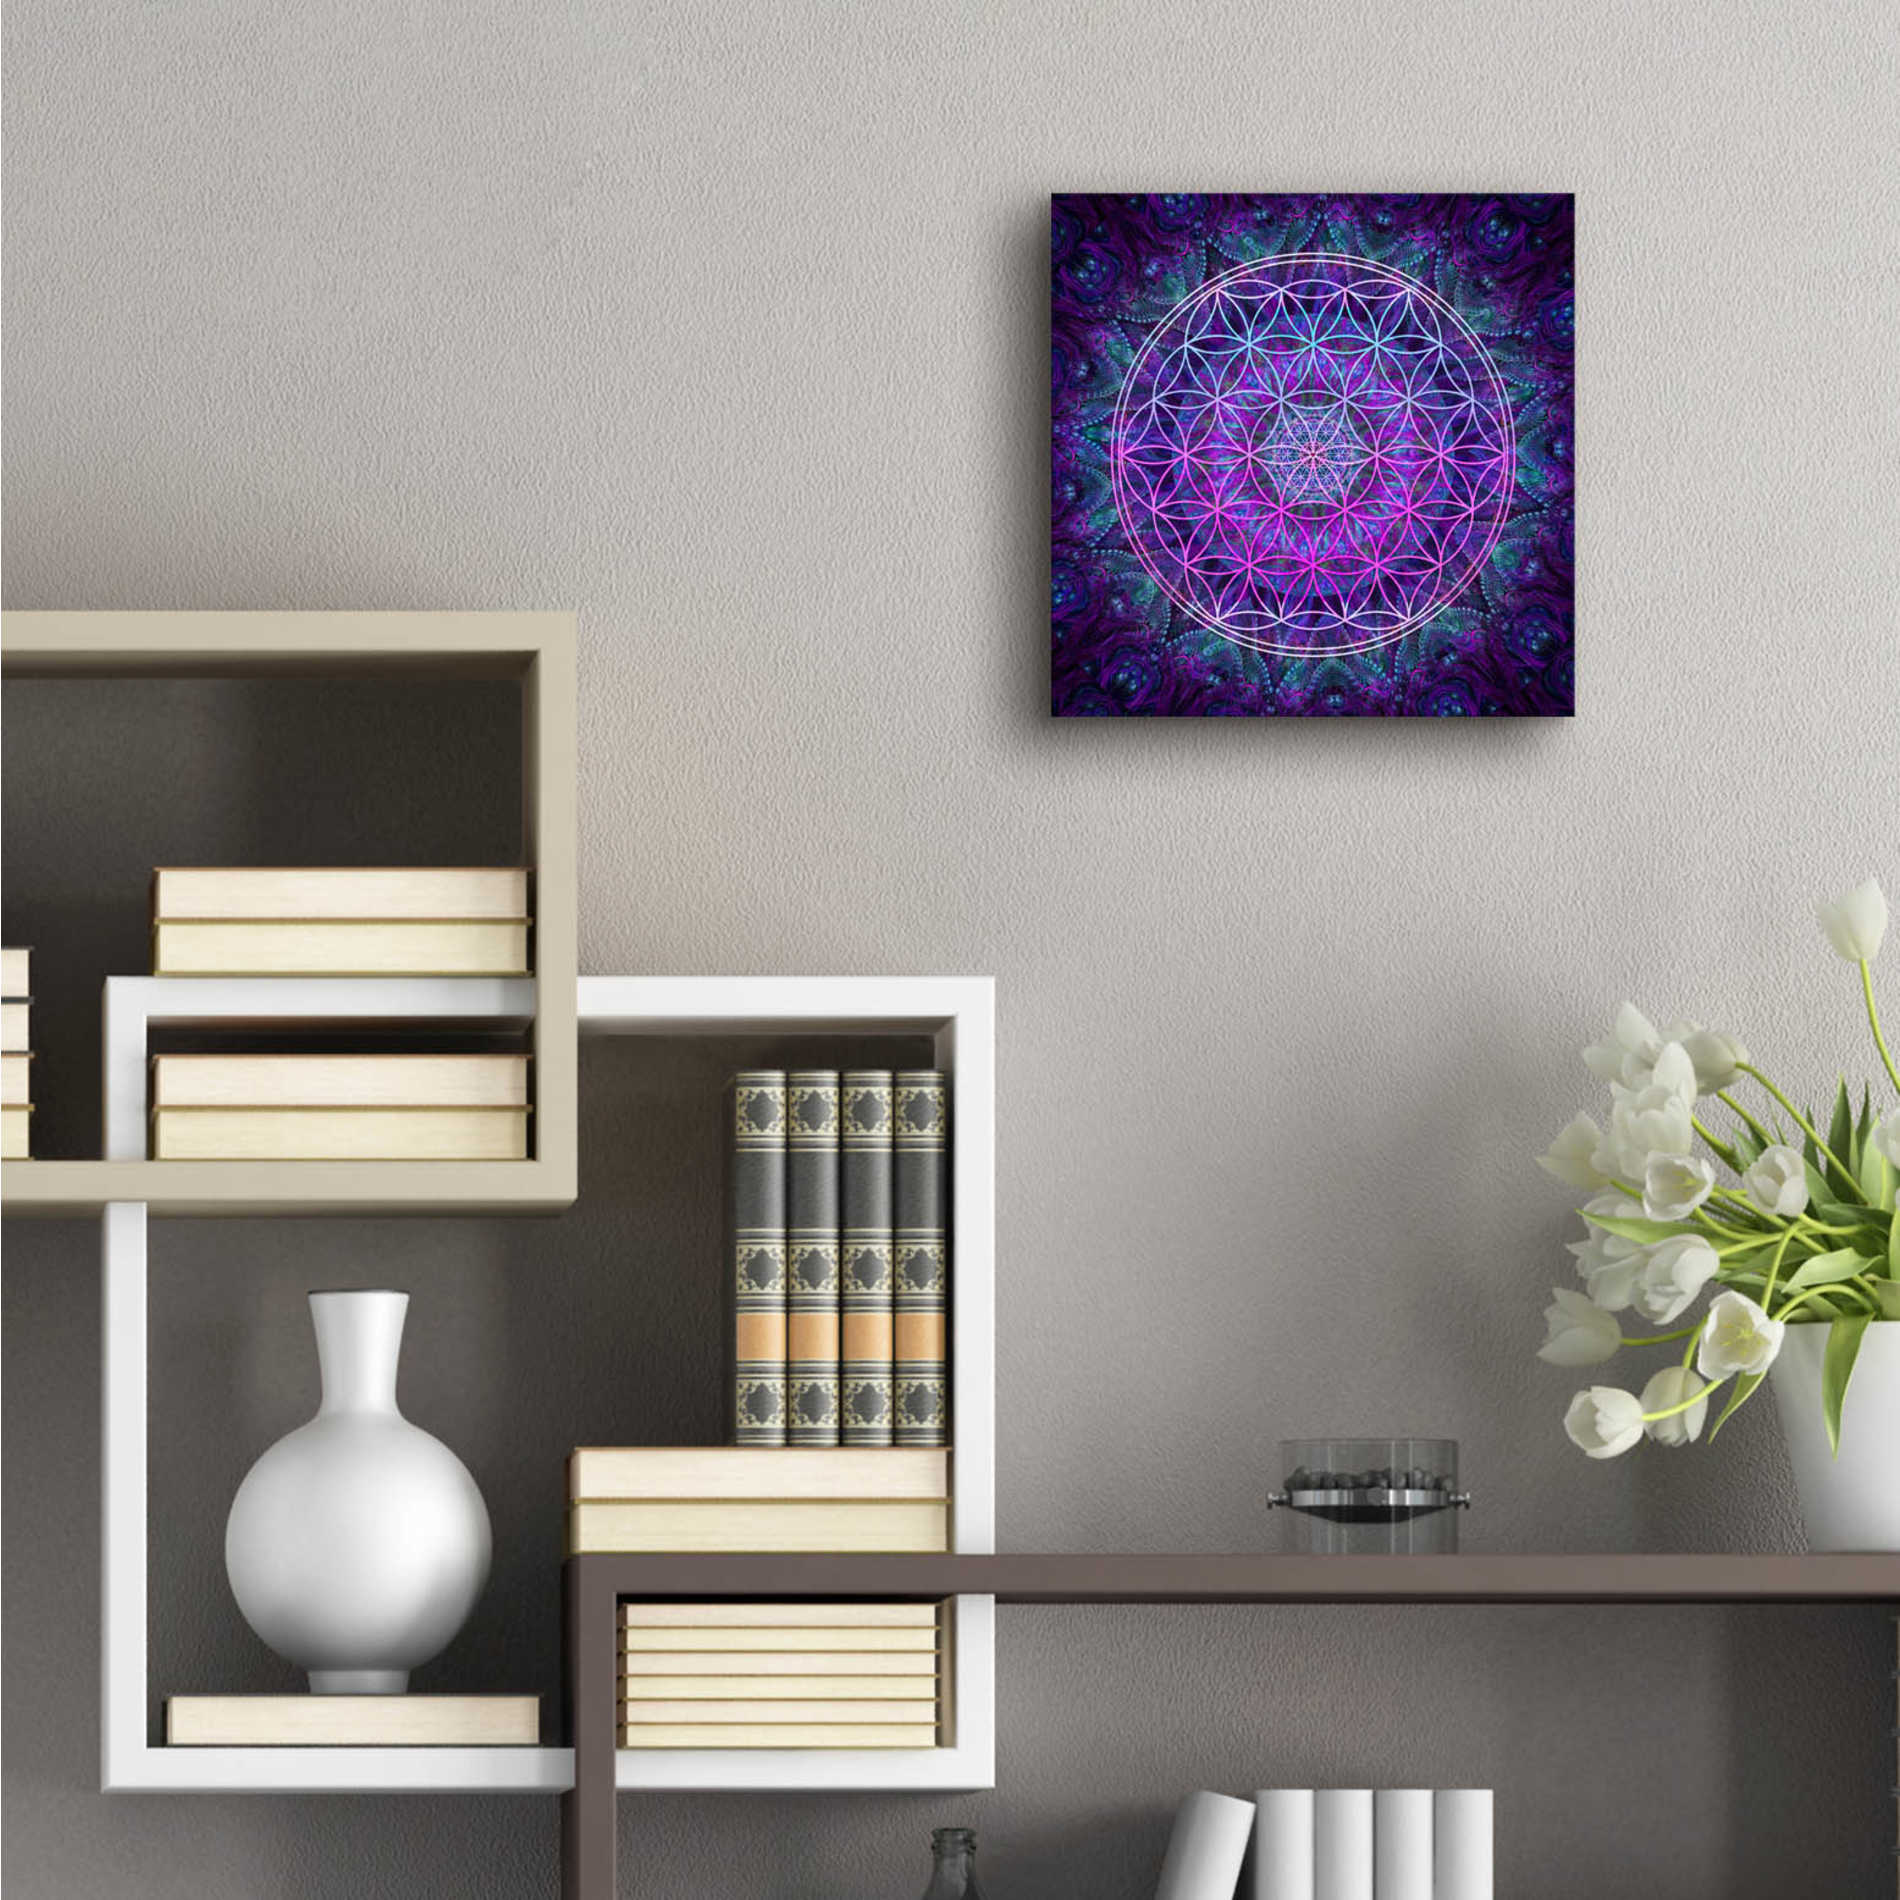 Epic Art 'Flower Of Life' by Cameron Gray Acrylic Glass Wall Art,12x12